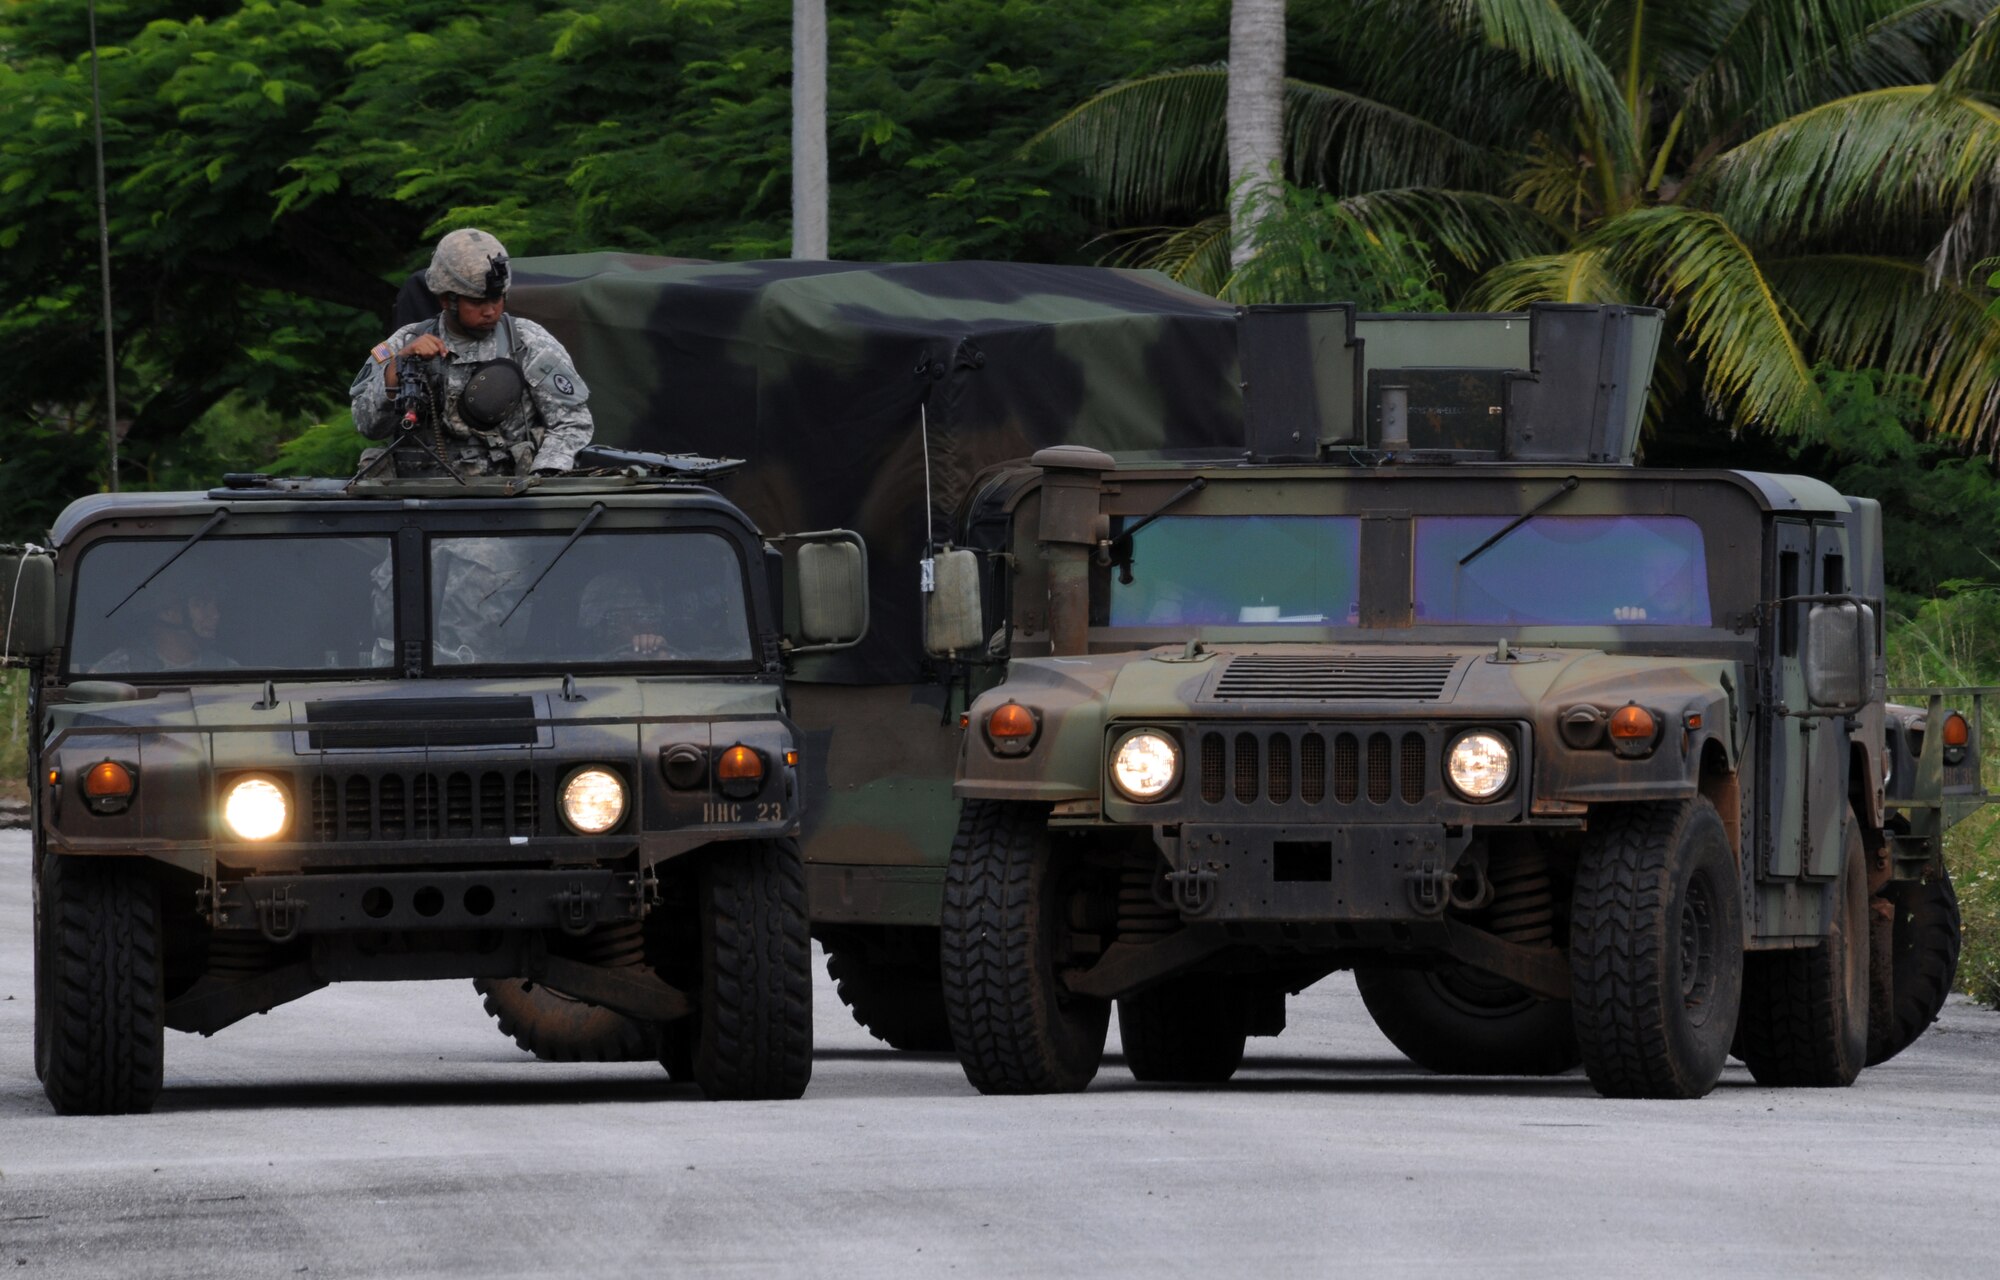 ANDERSEN AIR FORCE BASE, Guam – United States Army National Guard Guam members perform convoy security during the joint-service explosive ordnance disposal training here Sept. 17. The training focuses on individual battle drills, reaction to direct and indirect fire, communication skills, tactical convoy operations and improvised explosive devices. (U.S. Air Force photo by Airman 1st Class Nichelle Griffiths)